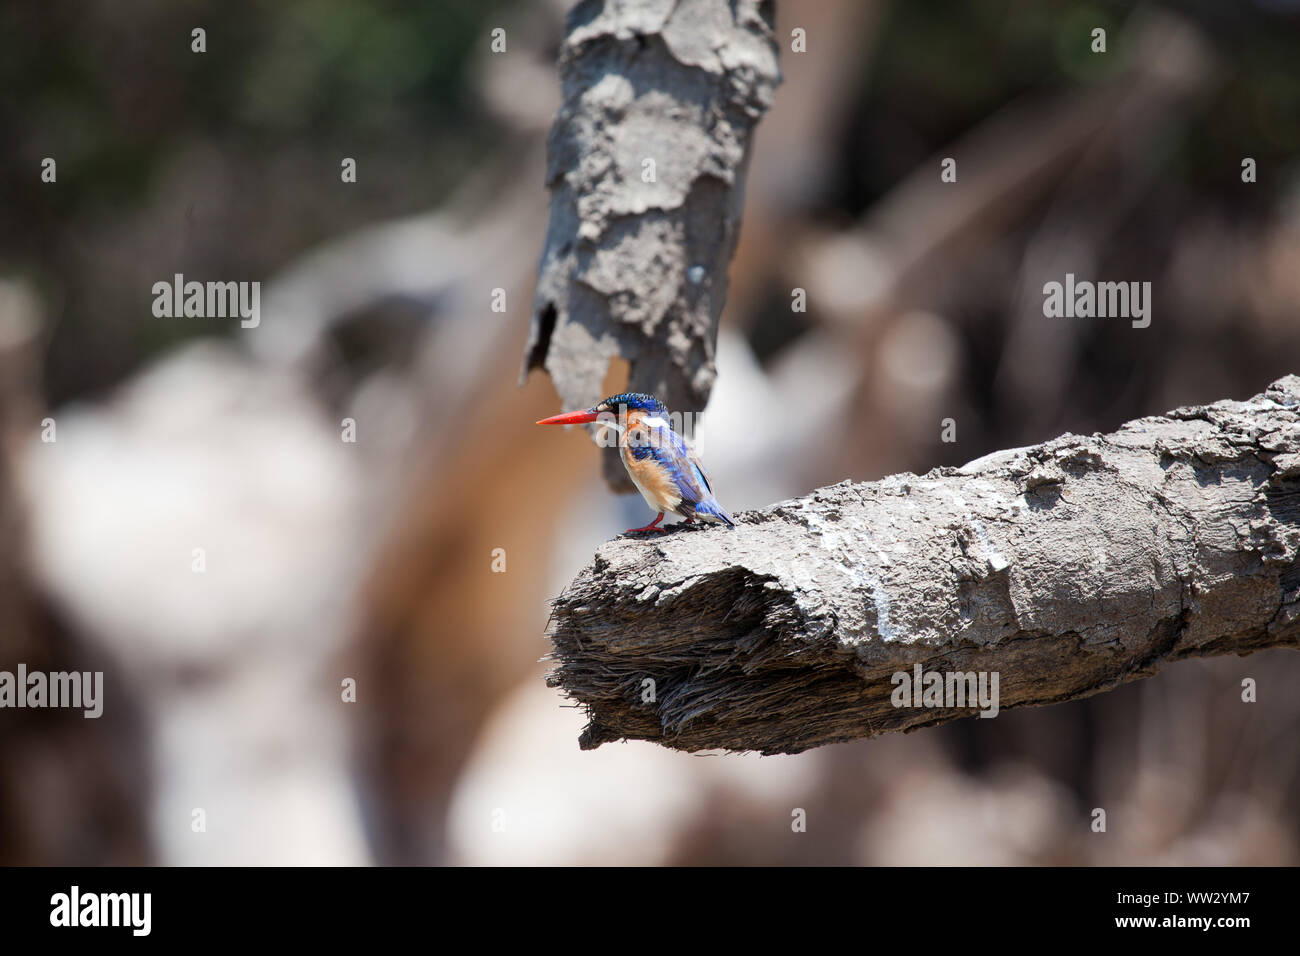 The small and very blue malachite kingfisher standing on a branch, Tanzania Stock Photo